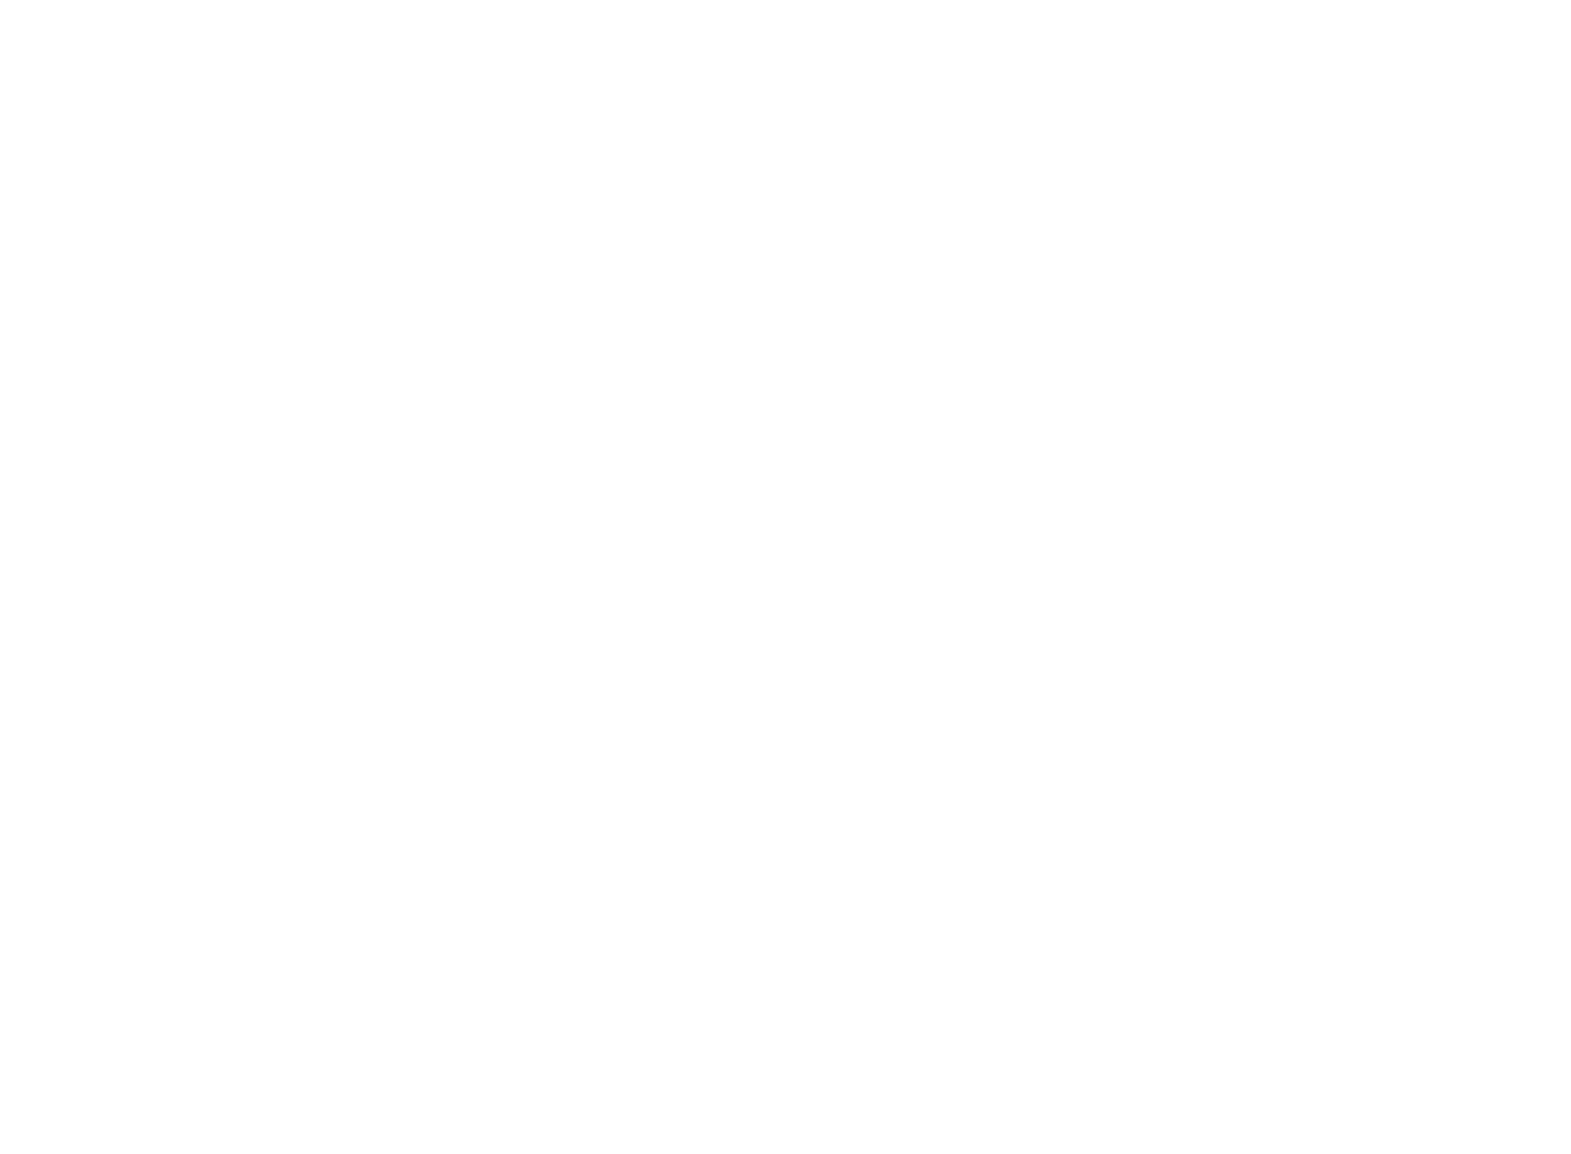 Genting Malaysia Berhad logo large for dark backgrounds (transparent PNG)